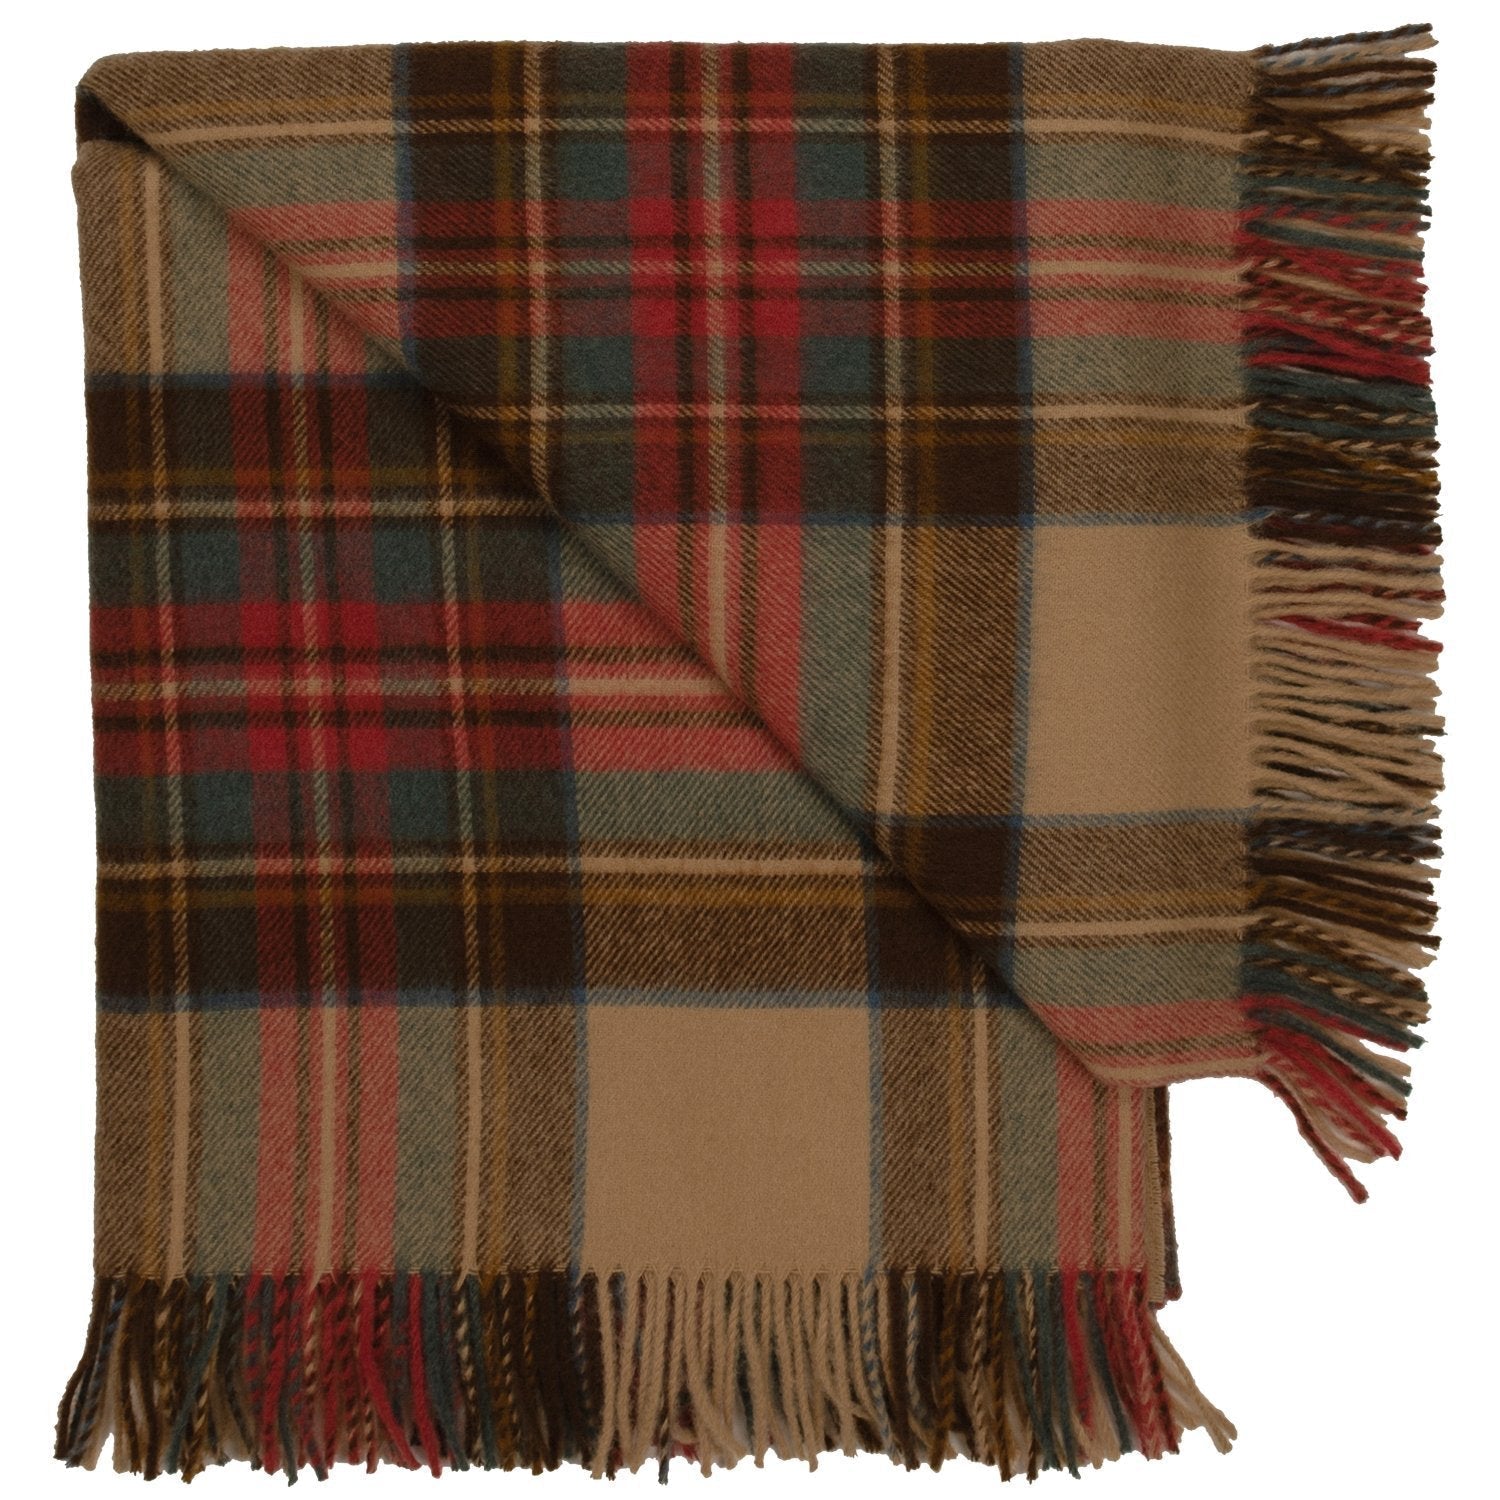 Prince of Scots Highland Tweed Merino Wool Throw ~ Antique Dress Stewart ~-Throws and Blankets-Prince of Scots-00810032750527-J400014-Prince of Scots